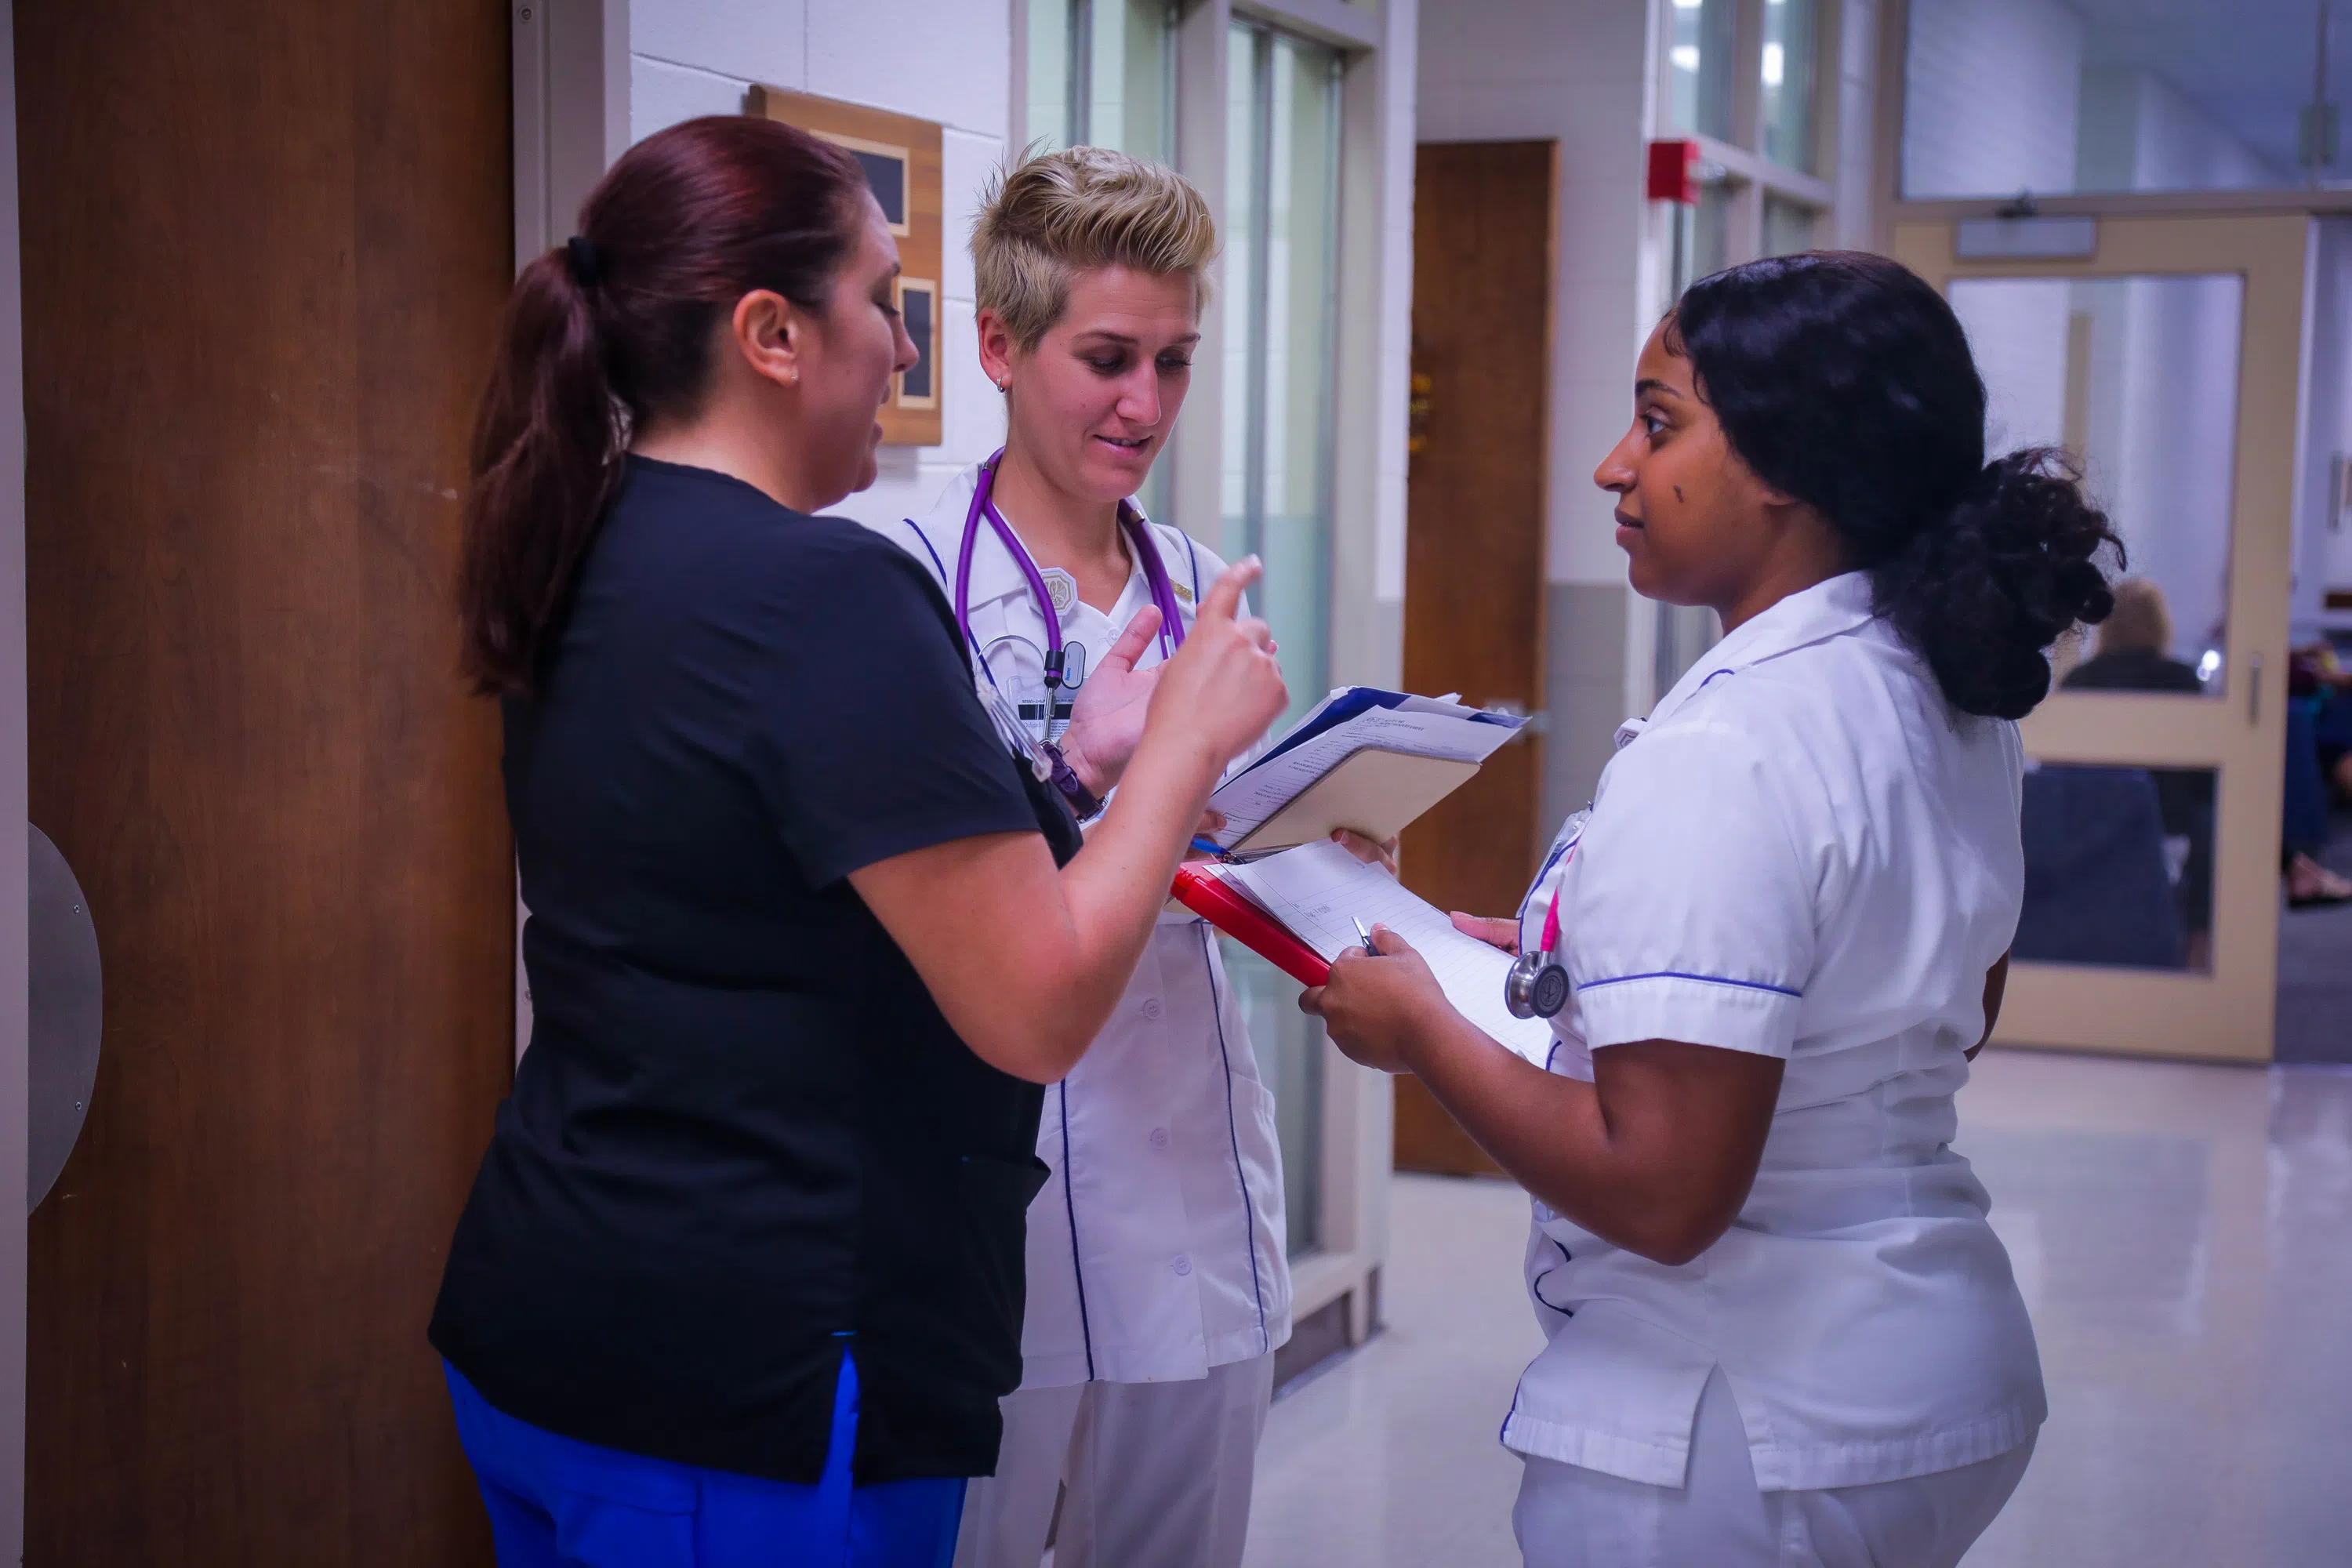 3 nursing students talking with each other